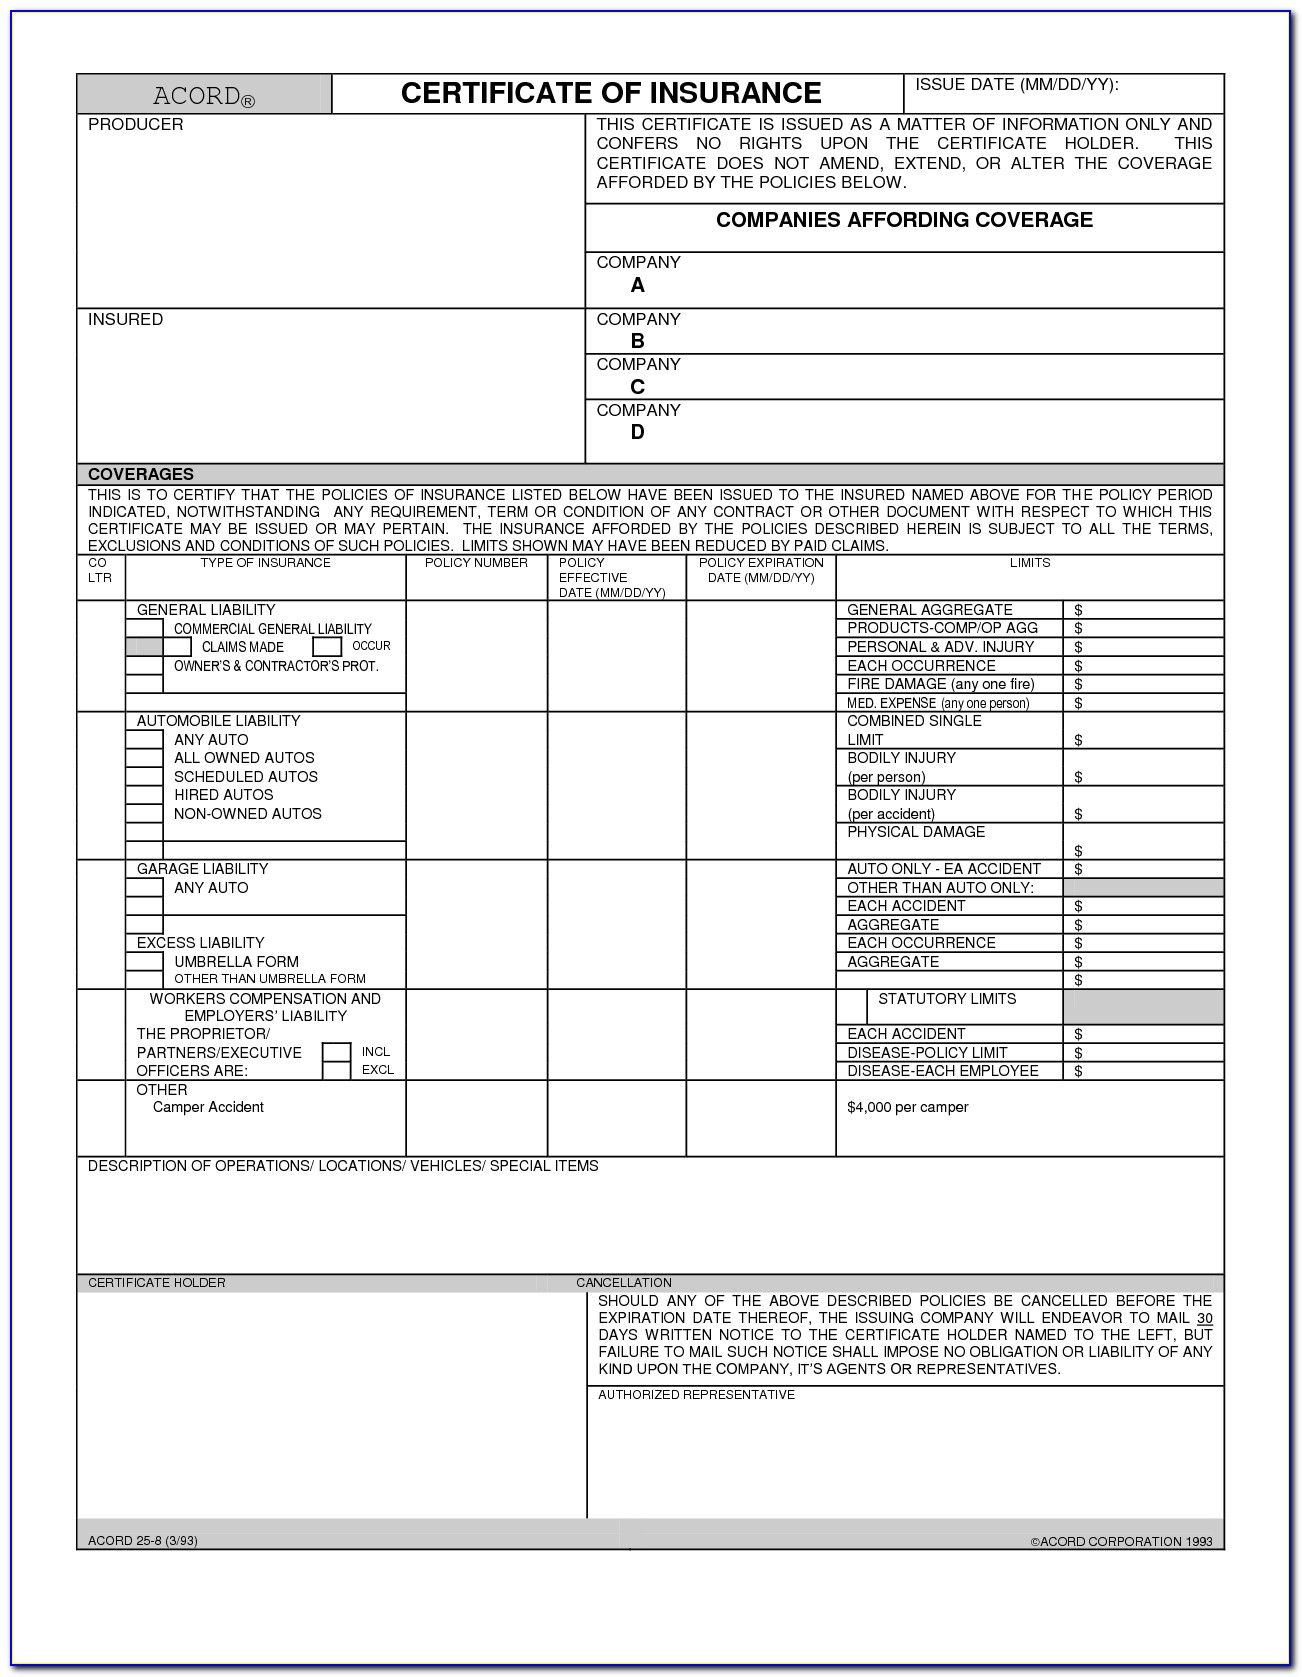 certificate of insurance acord form 25, acord certificate of liability insurance, acord 25 certificate of liability insurance, certificate of liability insurance form, printable certificate of liability insurance form, acord 25 - certificate of insurance (adobe fillable form), blank certificate of insurance form